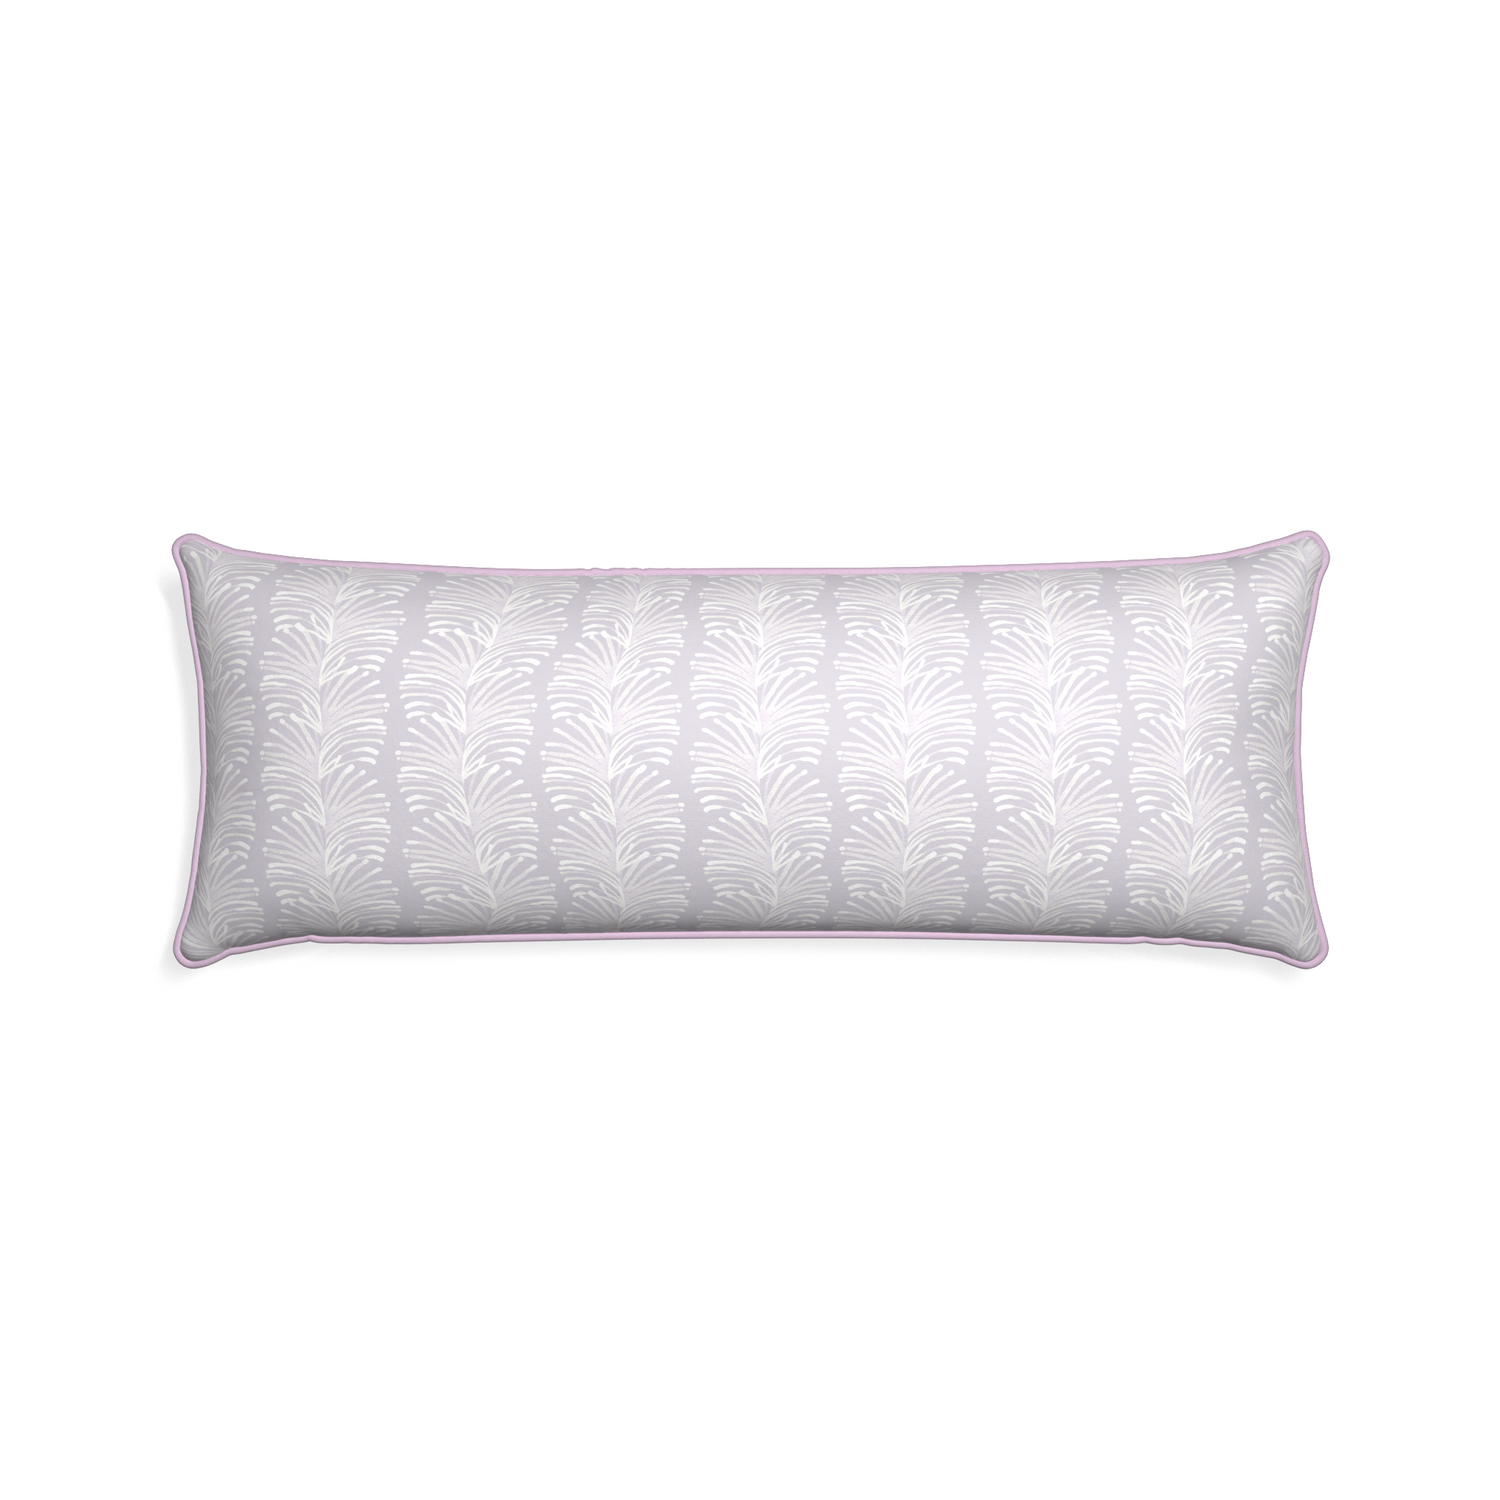 Xl-lumbar emma lavender custom lavender botanical stripepillow with l piping on white background